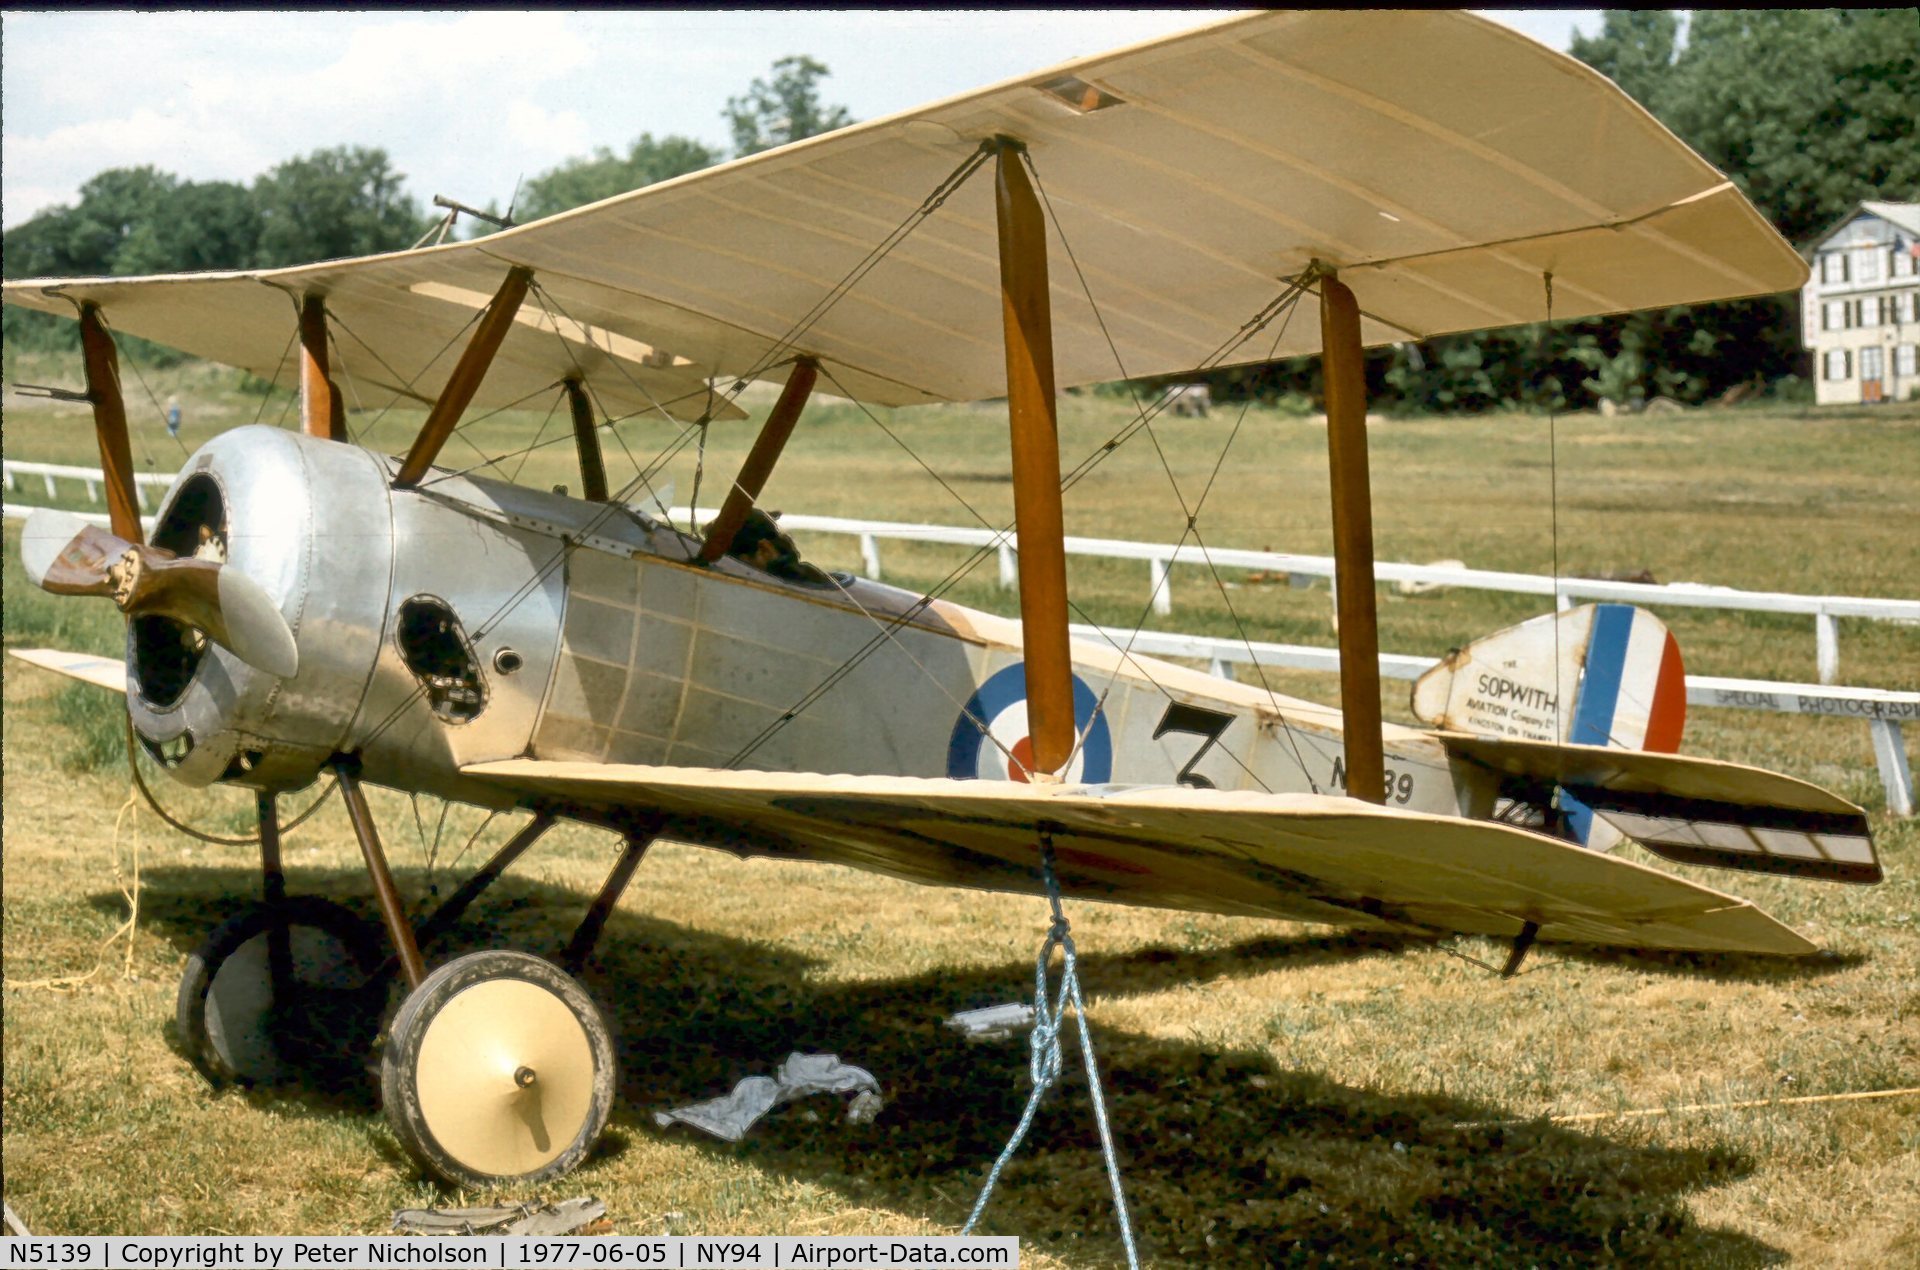 N5139, 1967 Sopwith Scout Replica C/N 83213, Whilst officially titled the Sopwith Scout, this is more commonly called a Sopwith Pup and was displayed at Rhinebeck in the summer of 1977.